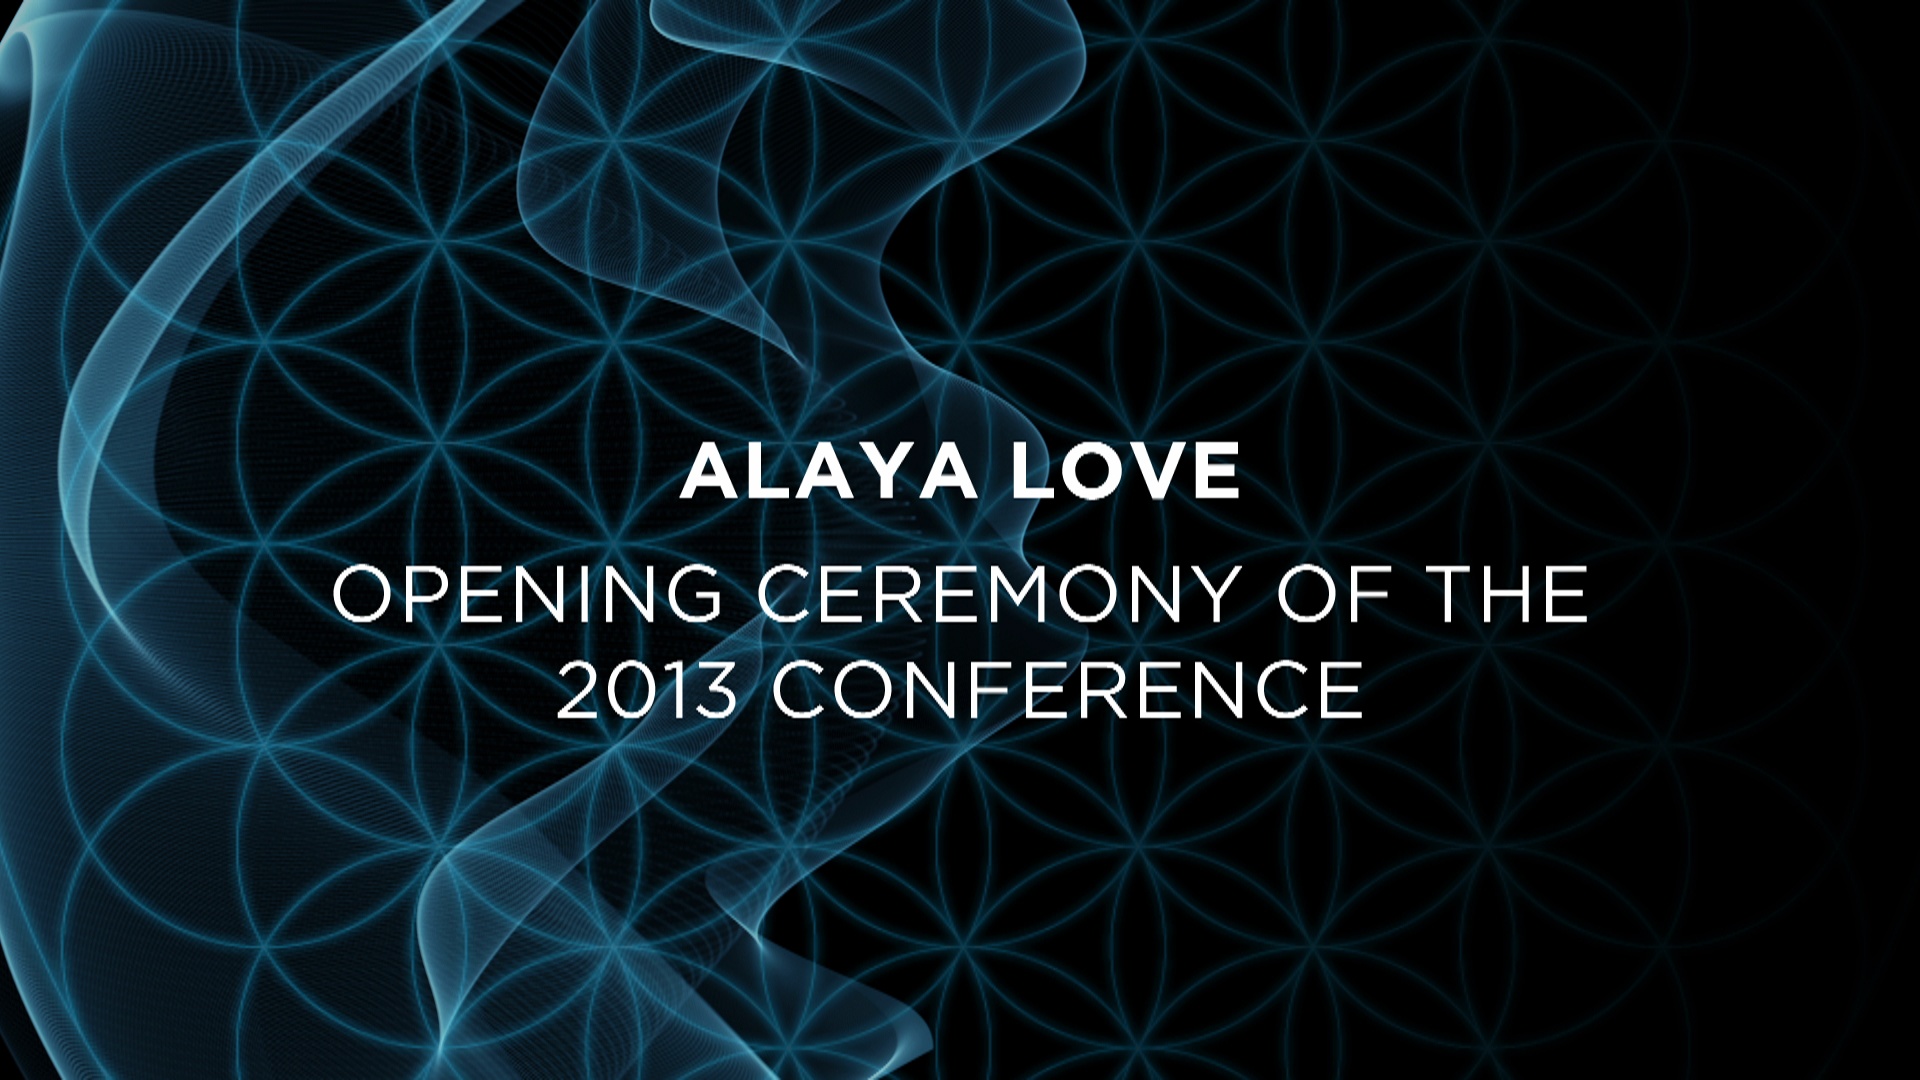 Alaya Love : Opening Ceremony of the 2013 Breakthrough Energy Conference